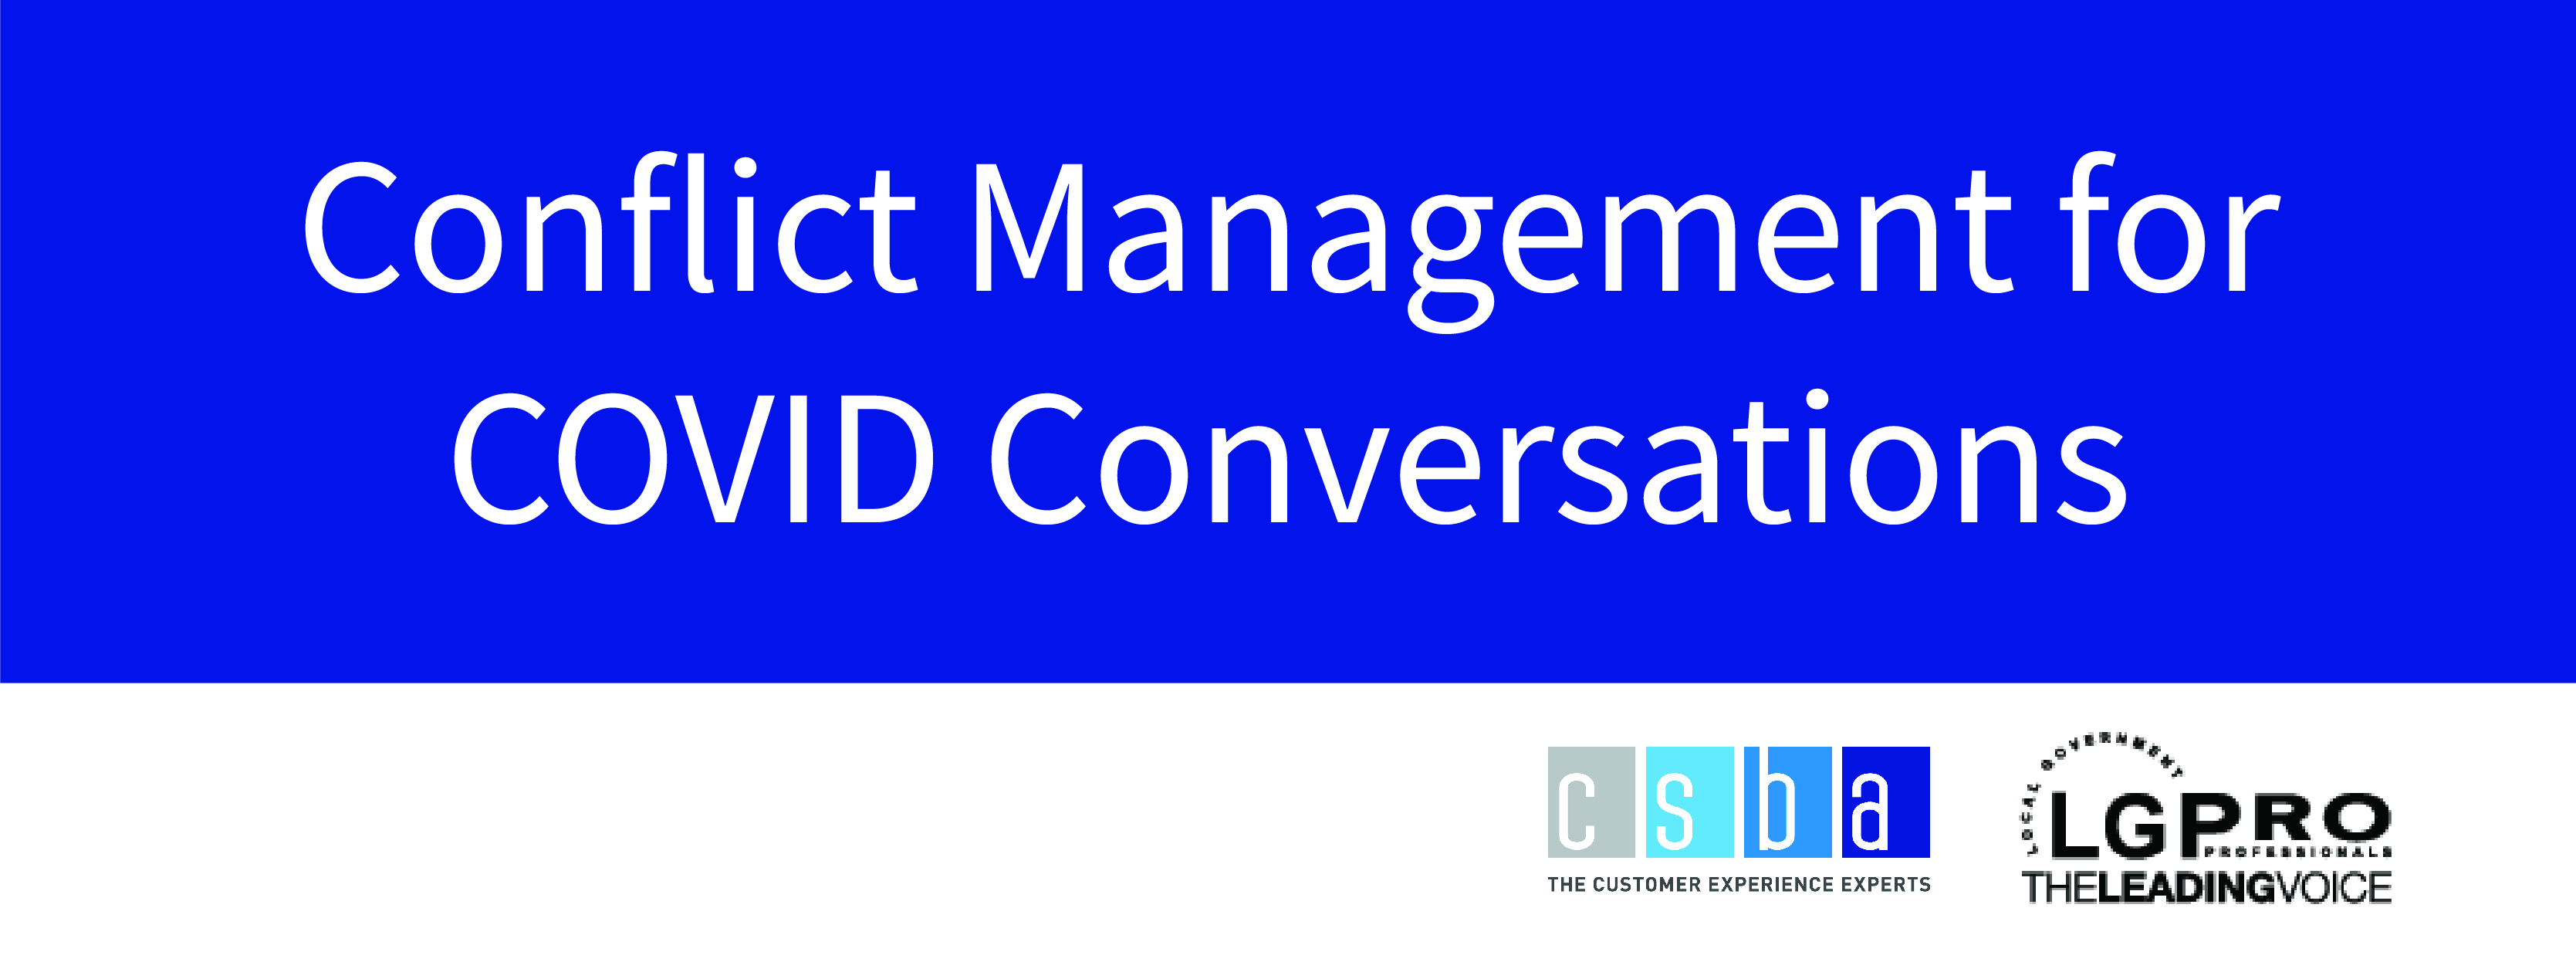 Conflict Management for COVID Conversations - FULLY BOOKED